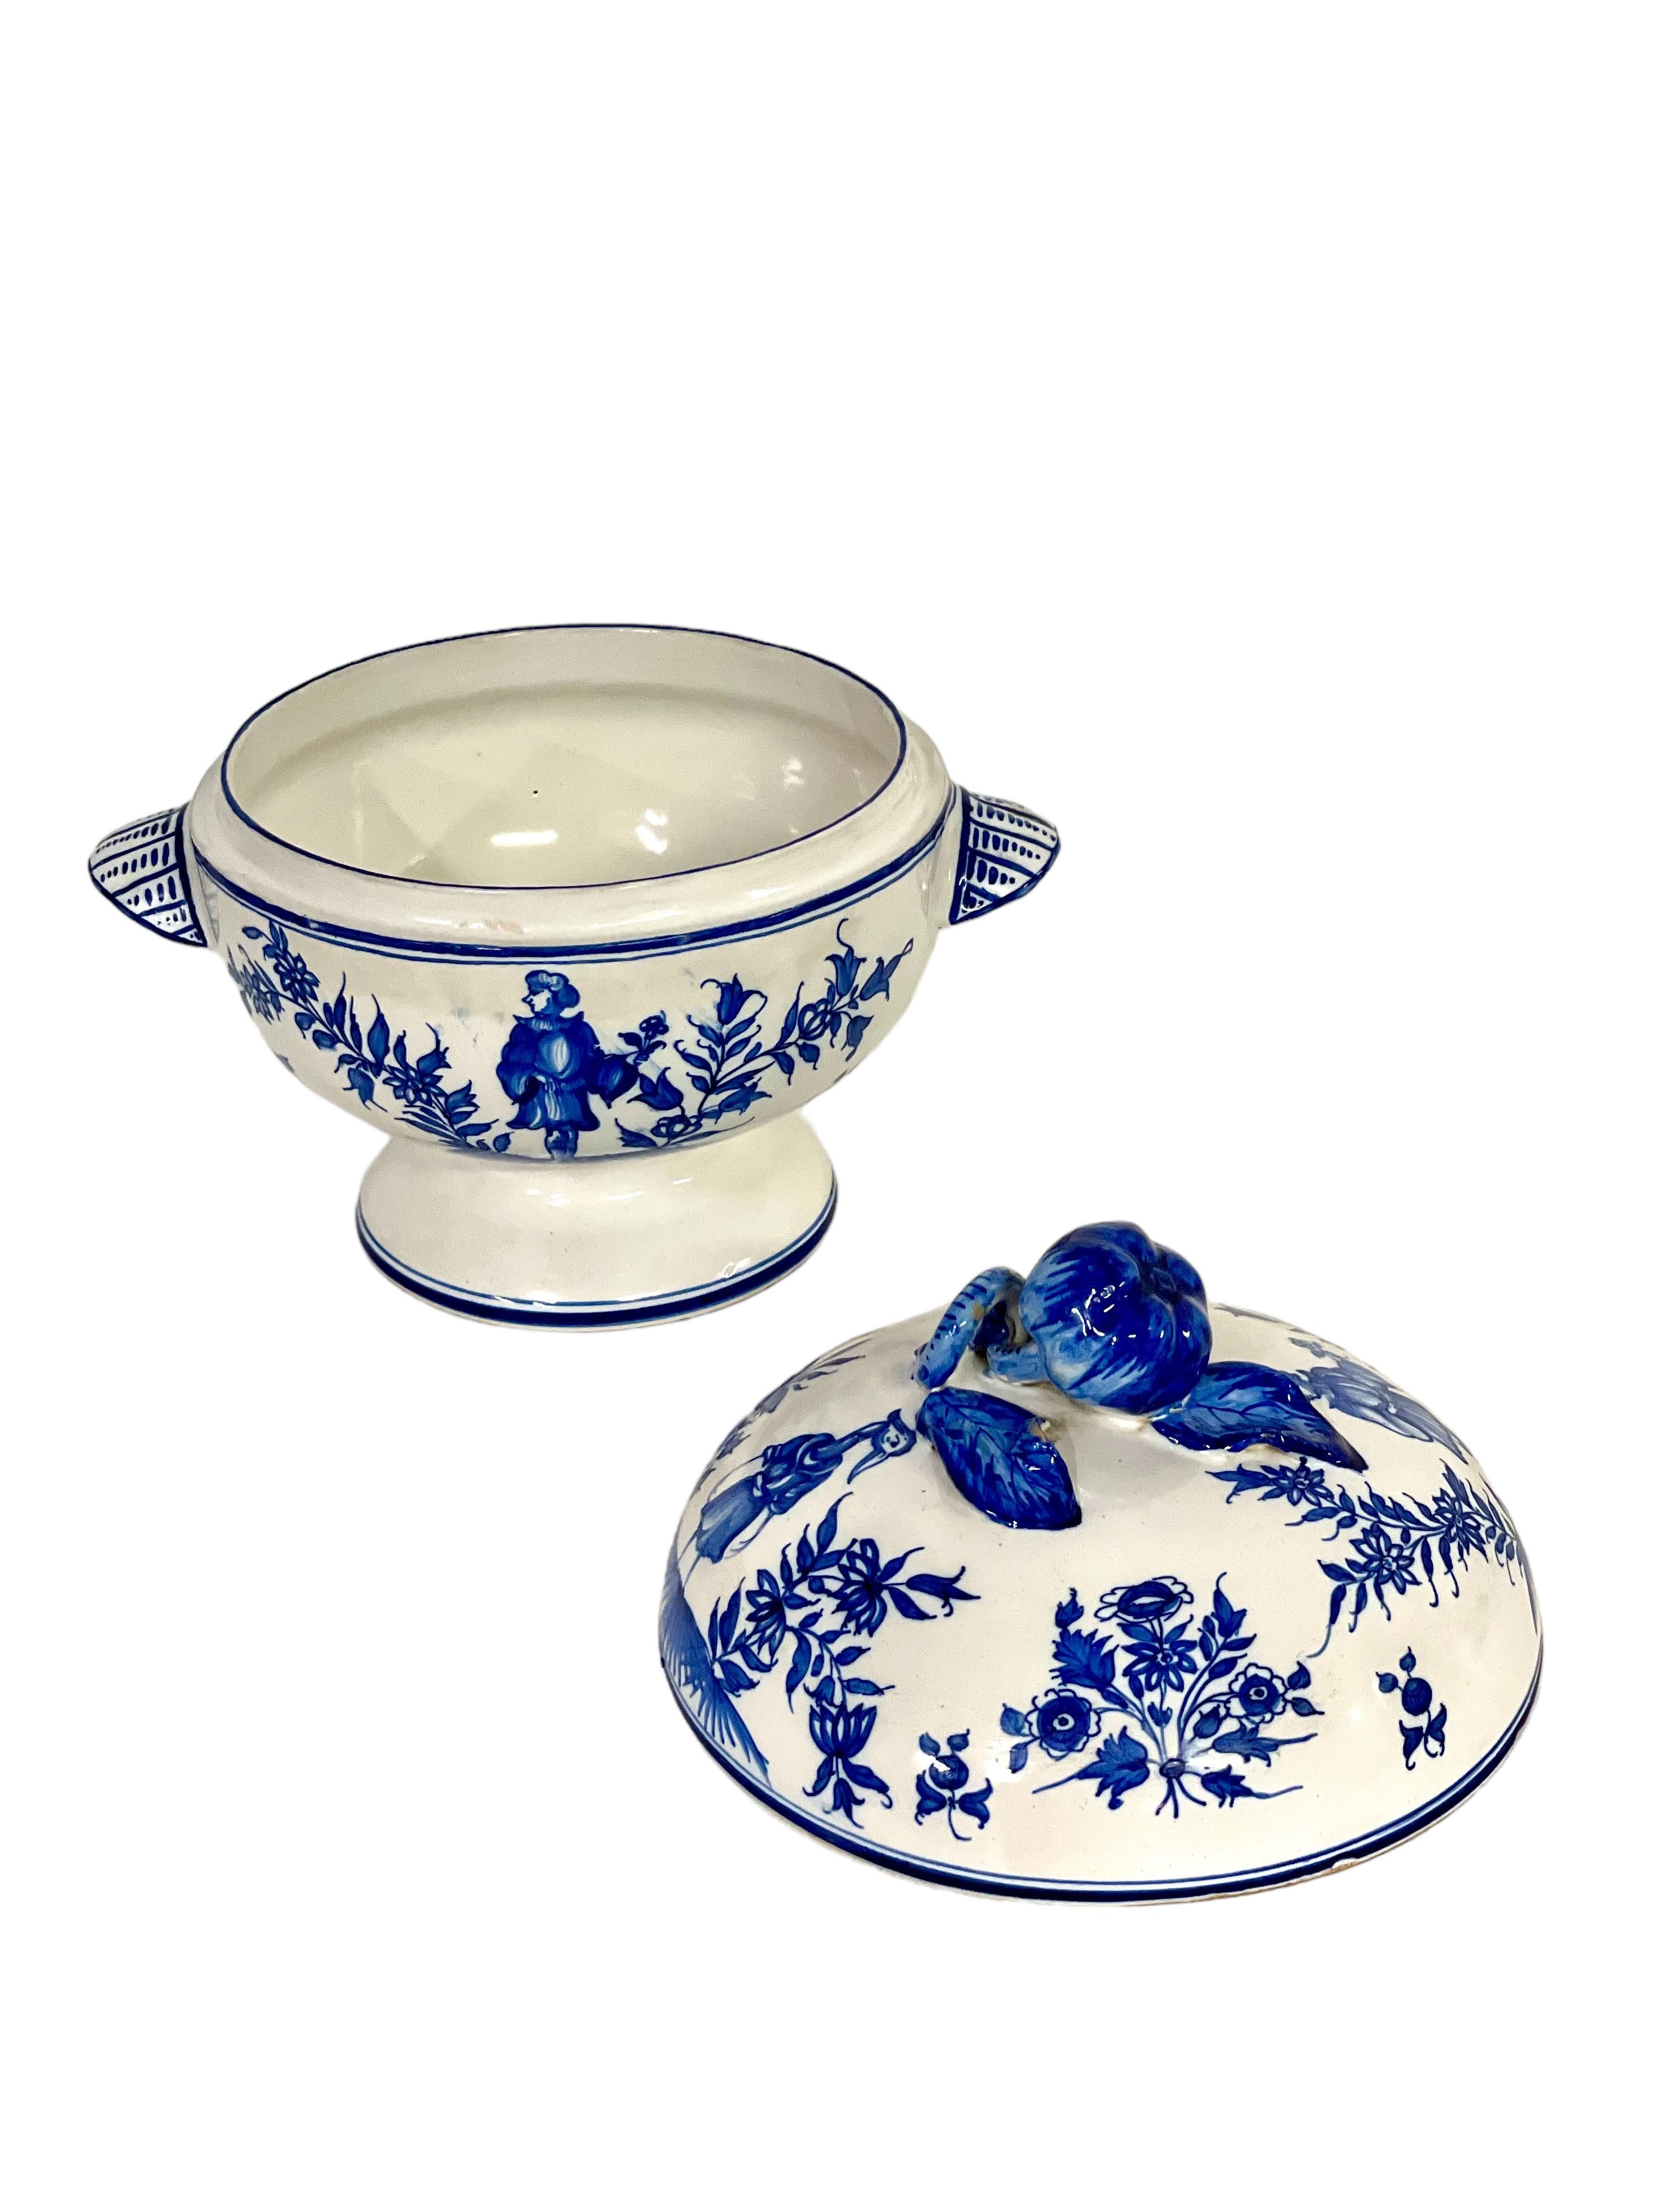 Blue and White Earthenware Lidded Tureen with Fantastical Decoration For Sale 1